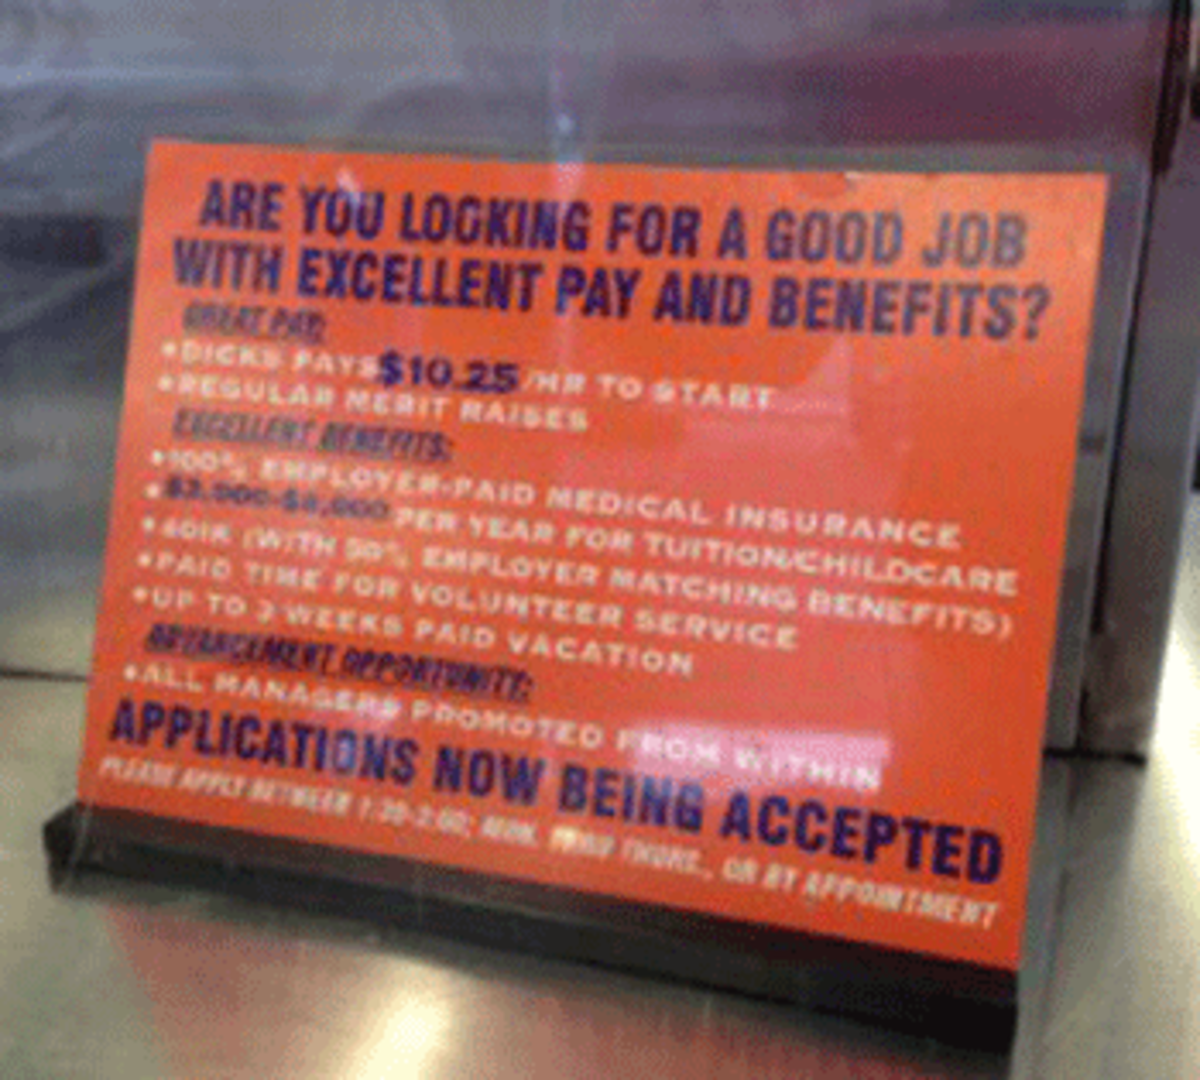 A sign at Dick’s Drive-In in Seattle outlines the hourly wage of at least $10 and medical and dental benefits offered to its employees.